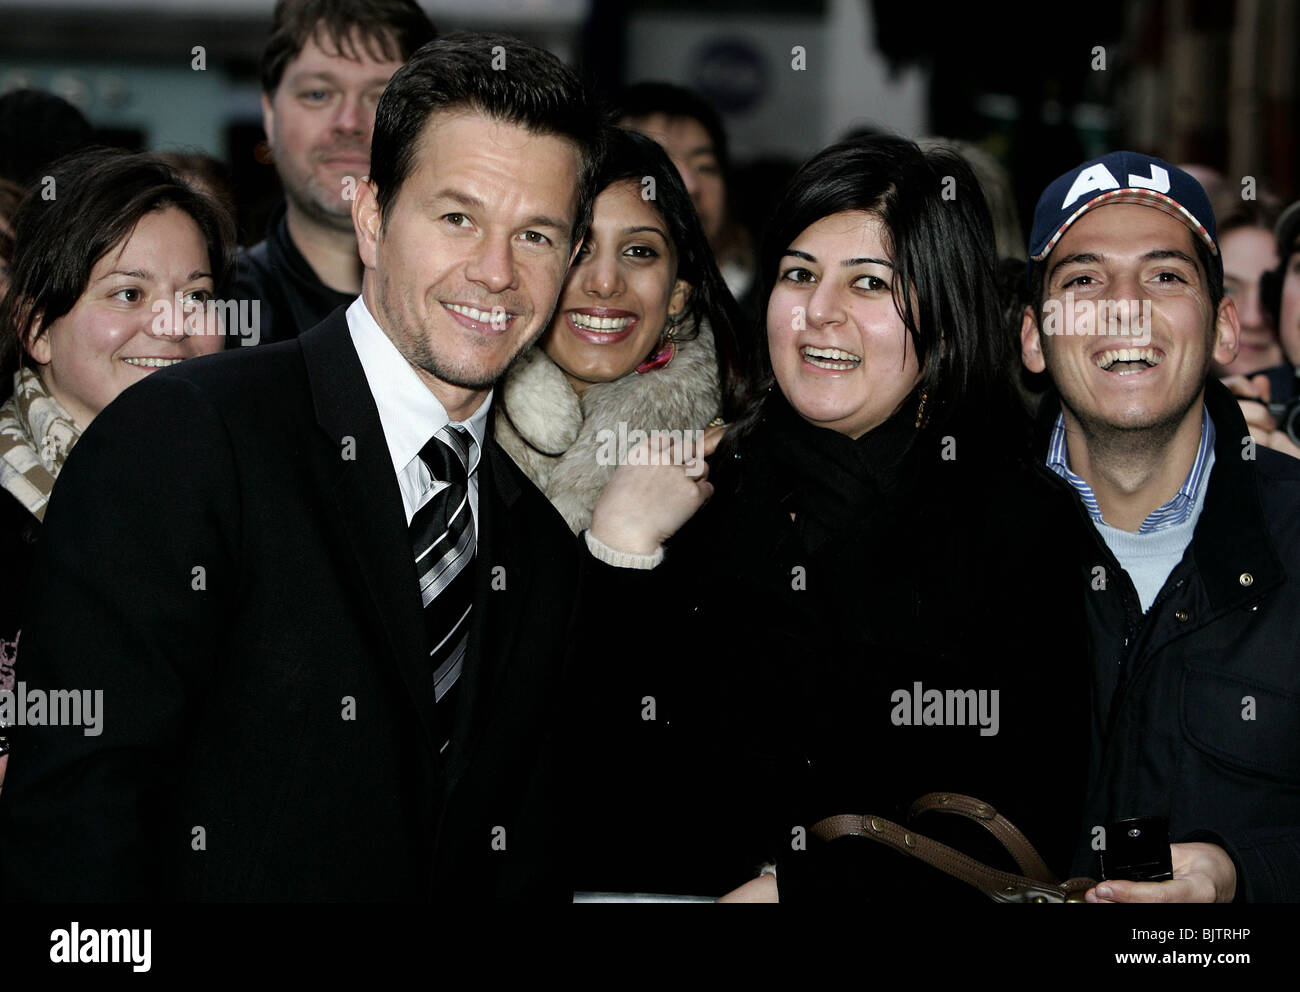 MARK WAHLBERG SHOOTER UK FILM PREMIERE ODEON West End di Londra Inghilterra 29 Marzo 2007 Foto Stock